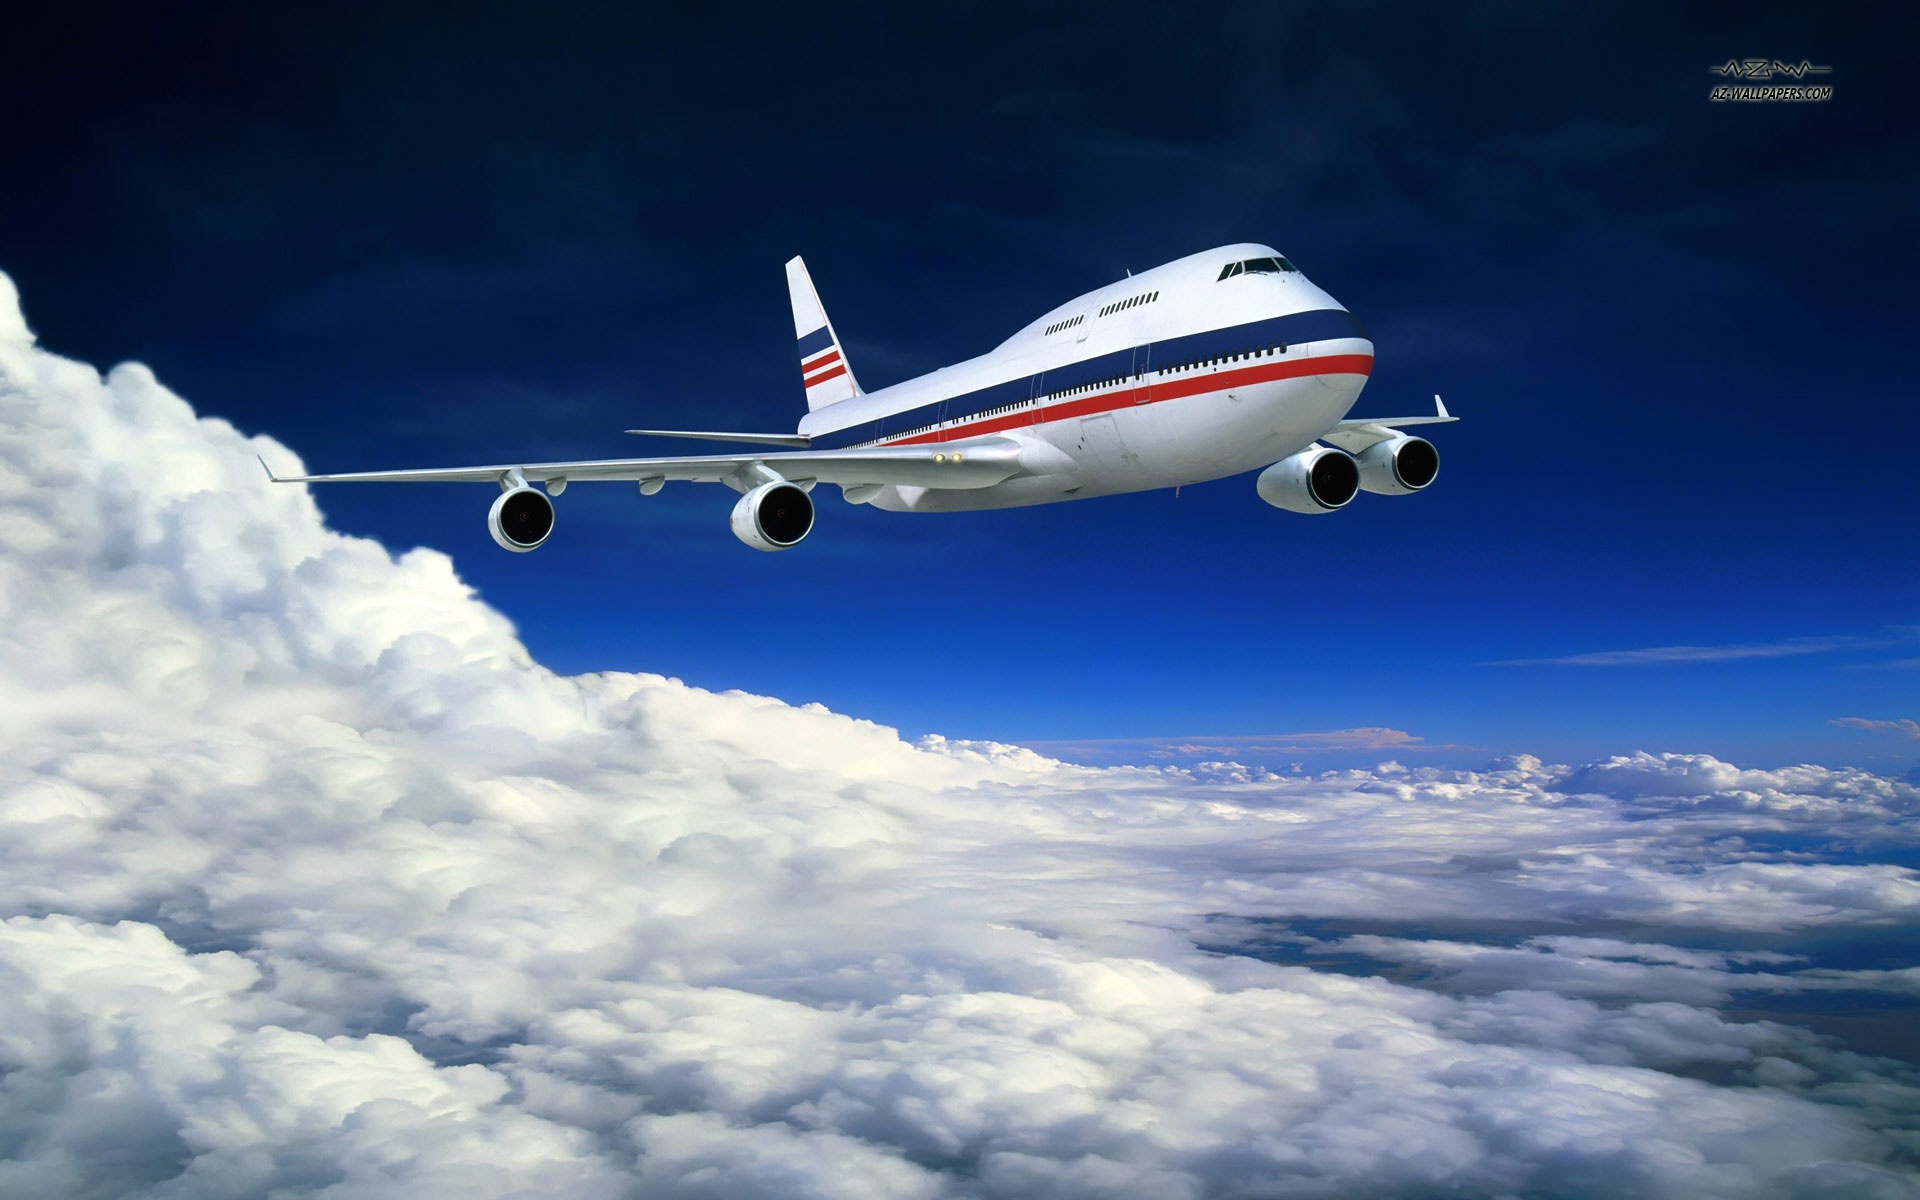 Please check our latest widescreen Boeing 747 HD Wallpapers below and bring beauty to your desktop.